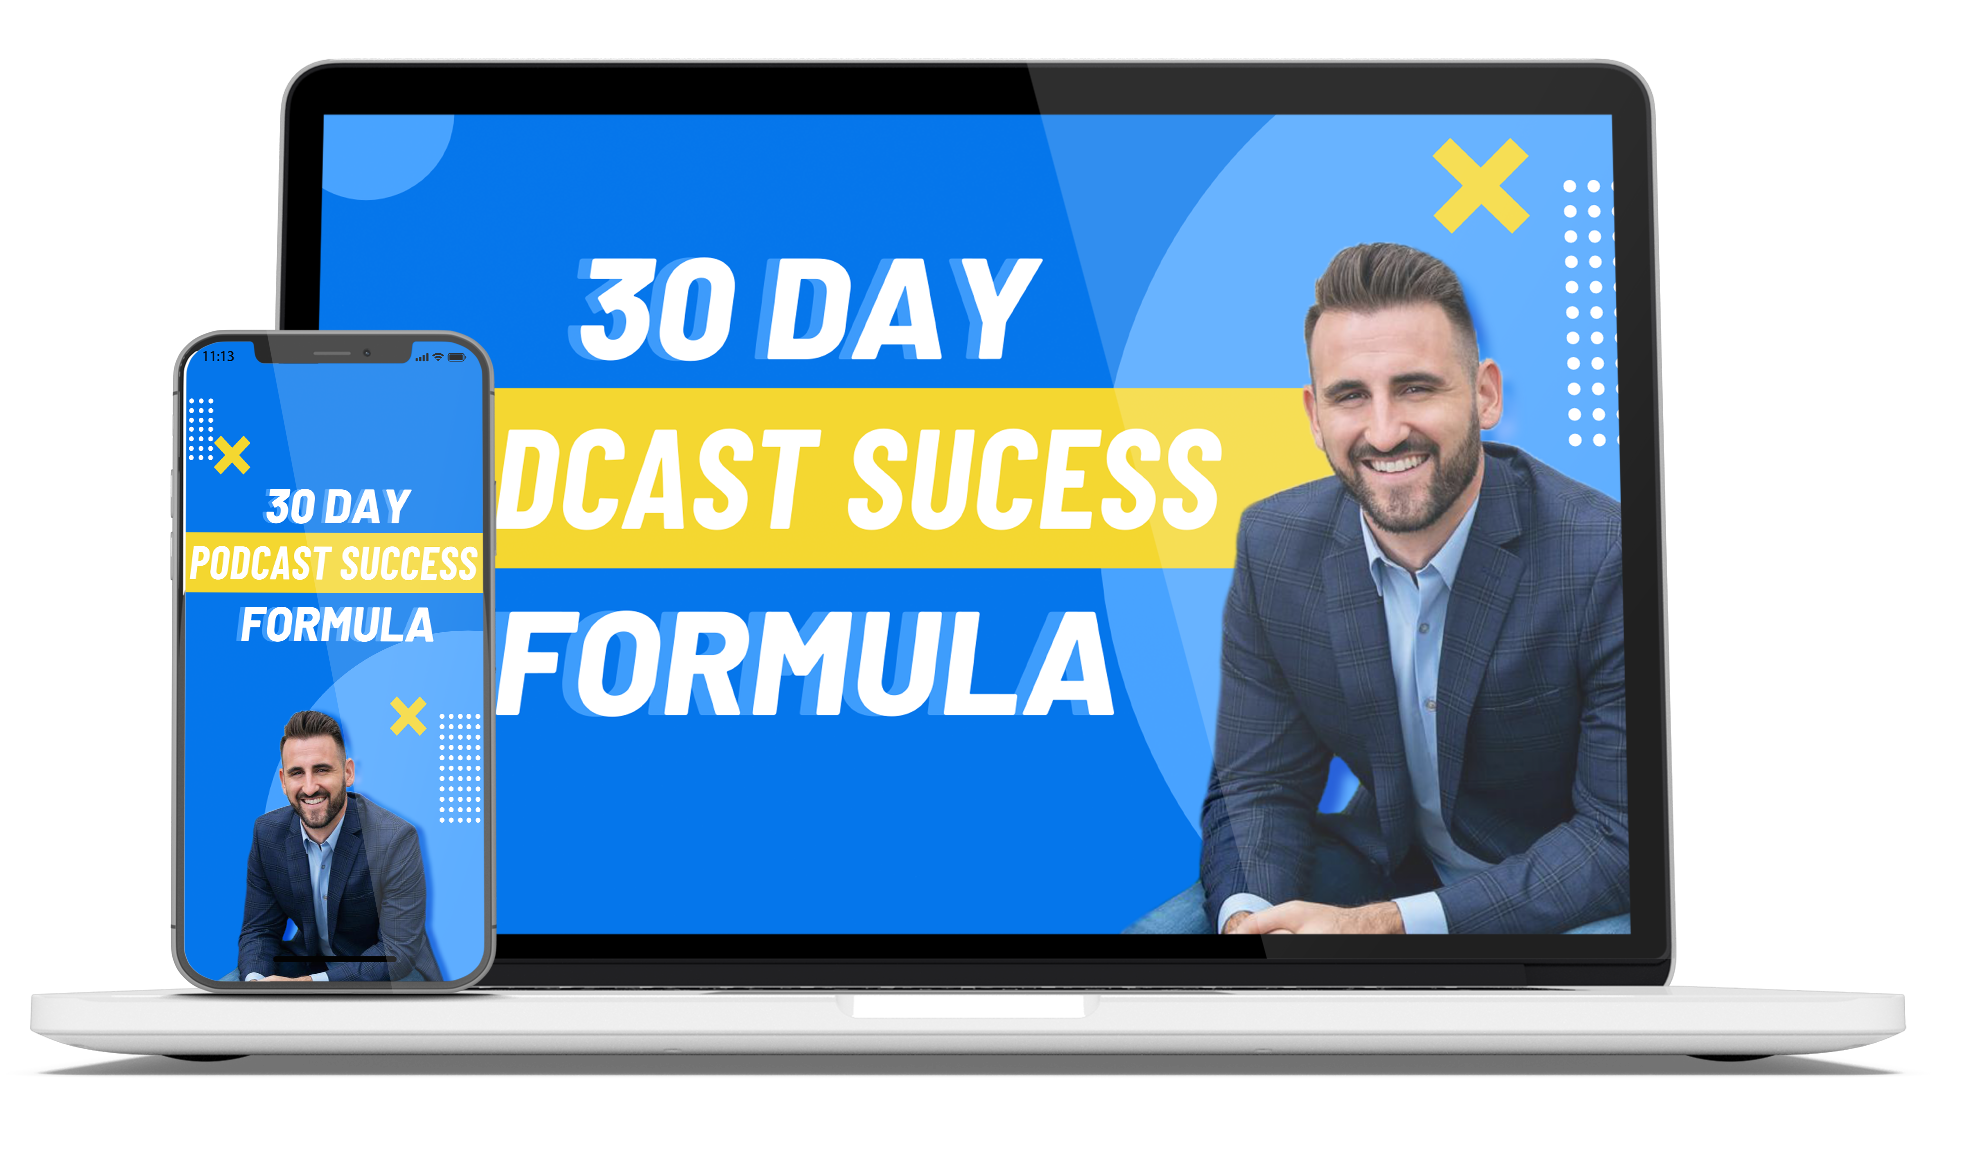 30 Day Podcast Launch Formula